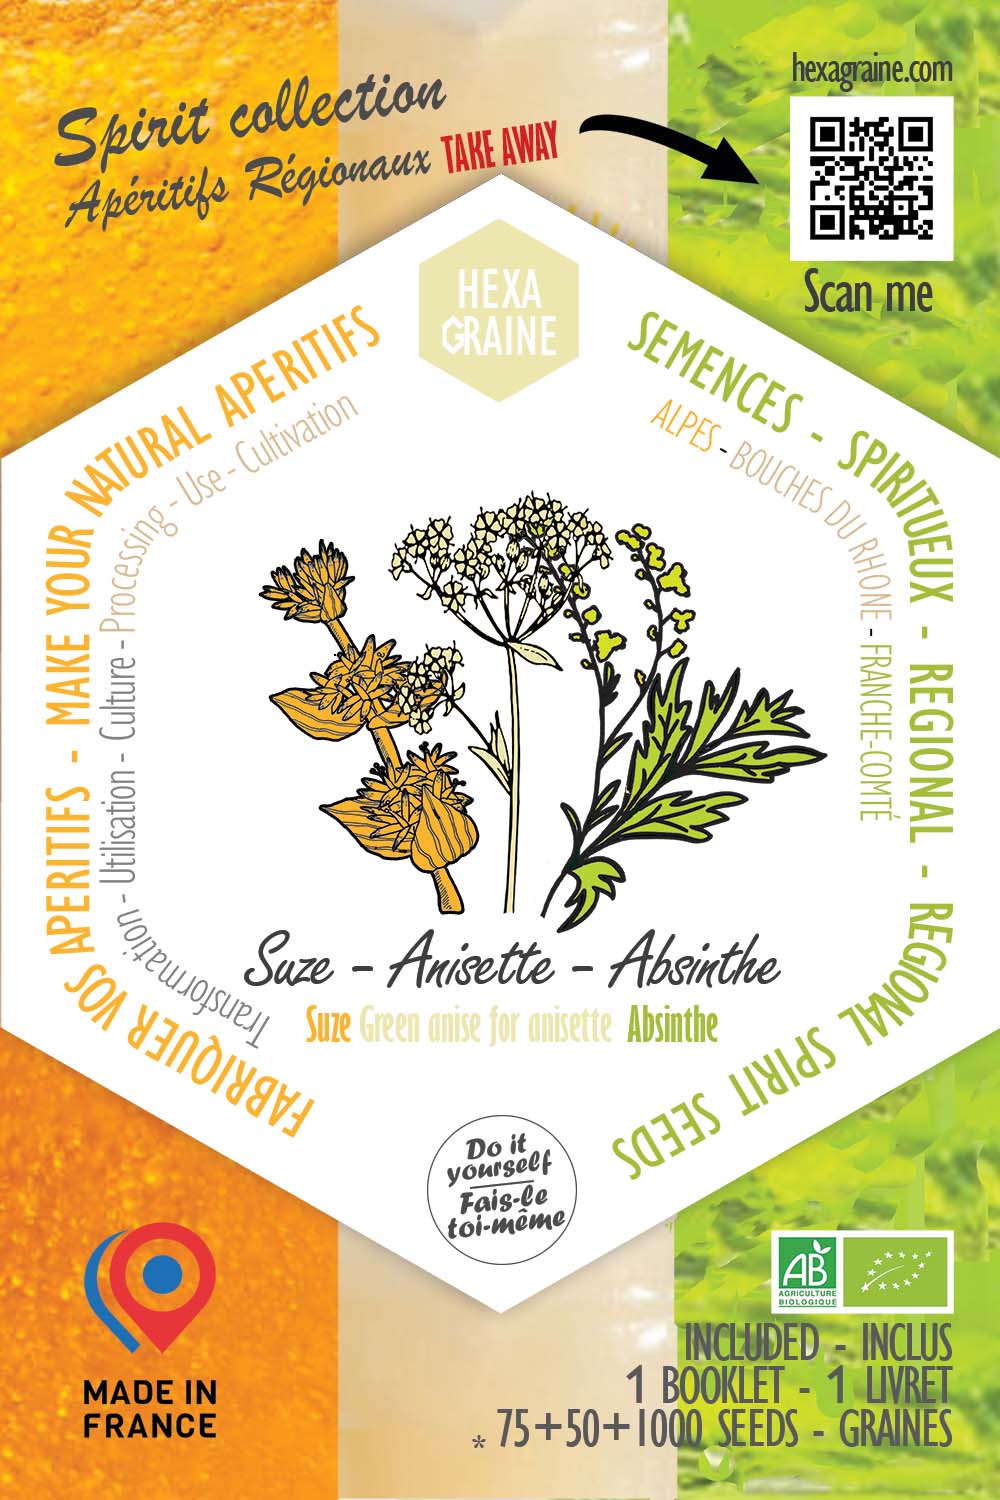 Box of seeds of medicinal and aromatic plants to make your spirits